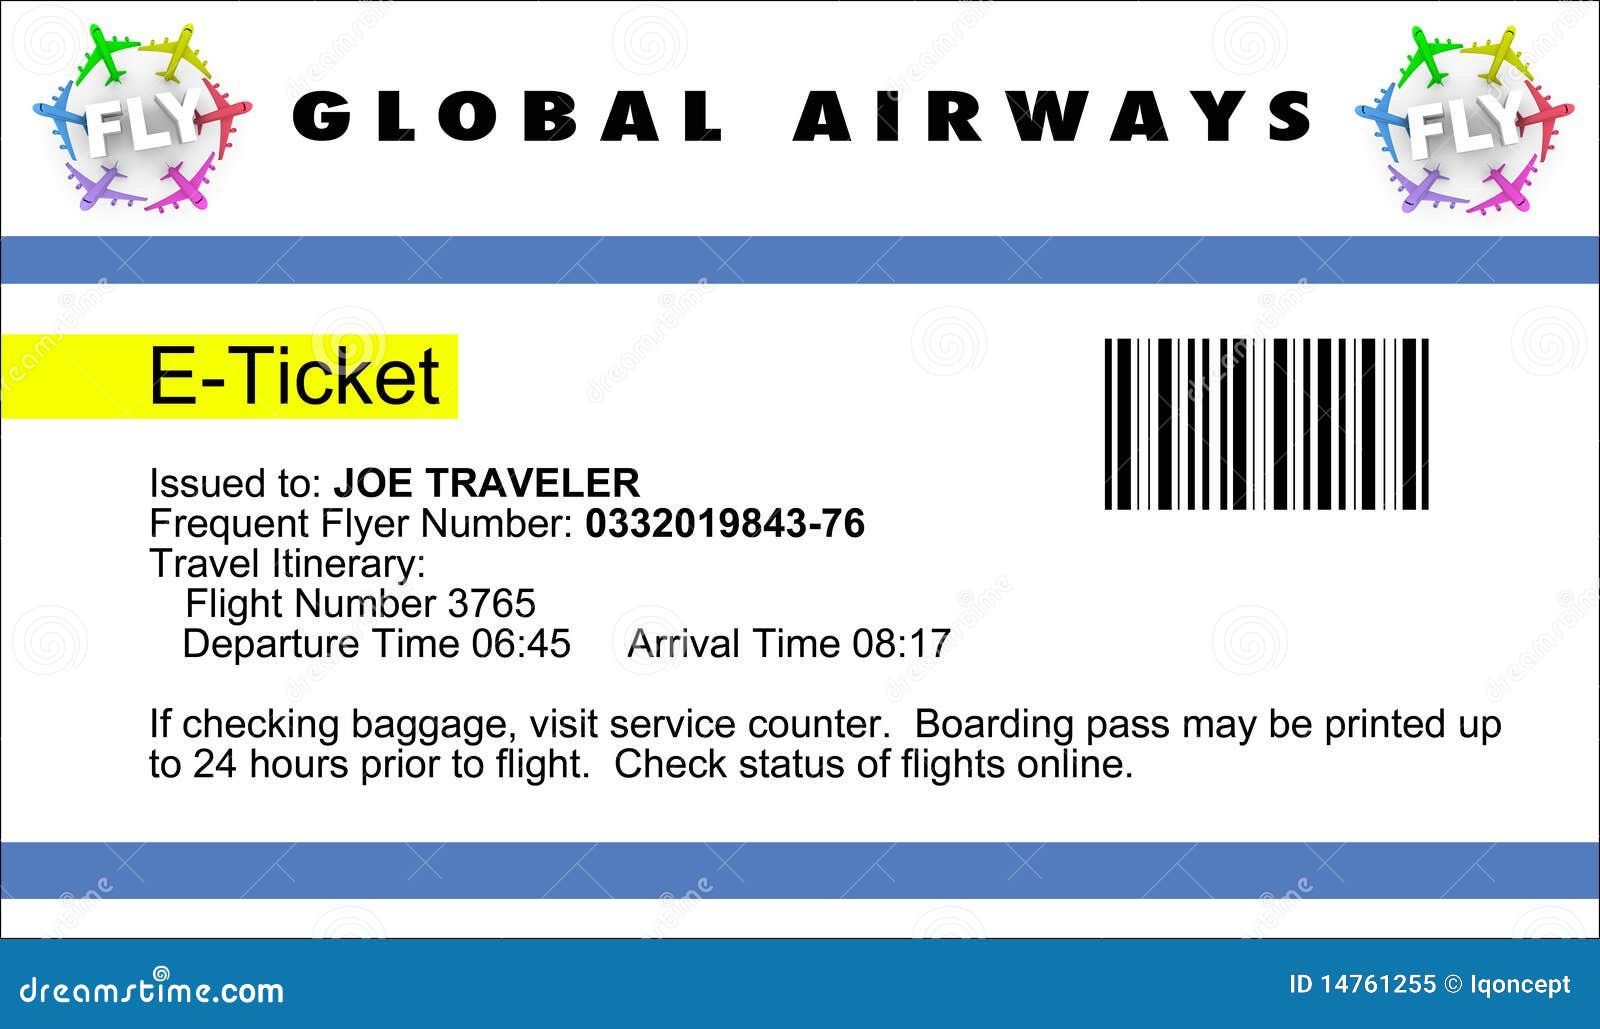 Ticket issued. E-ticket. Frequent Flyer number. What is your Primary frequent Flyer number.